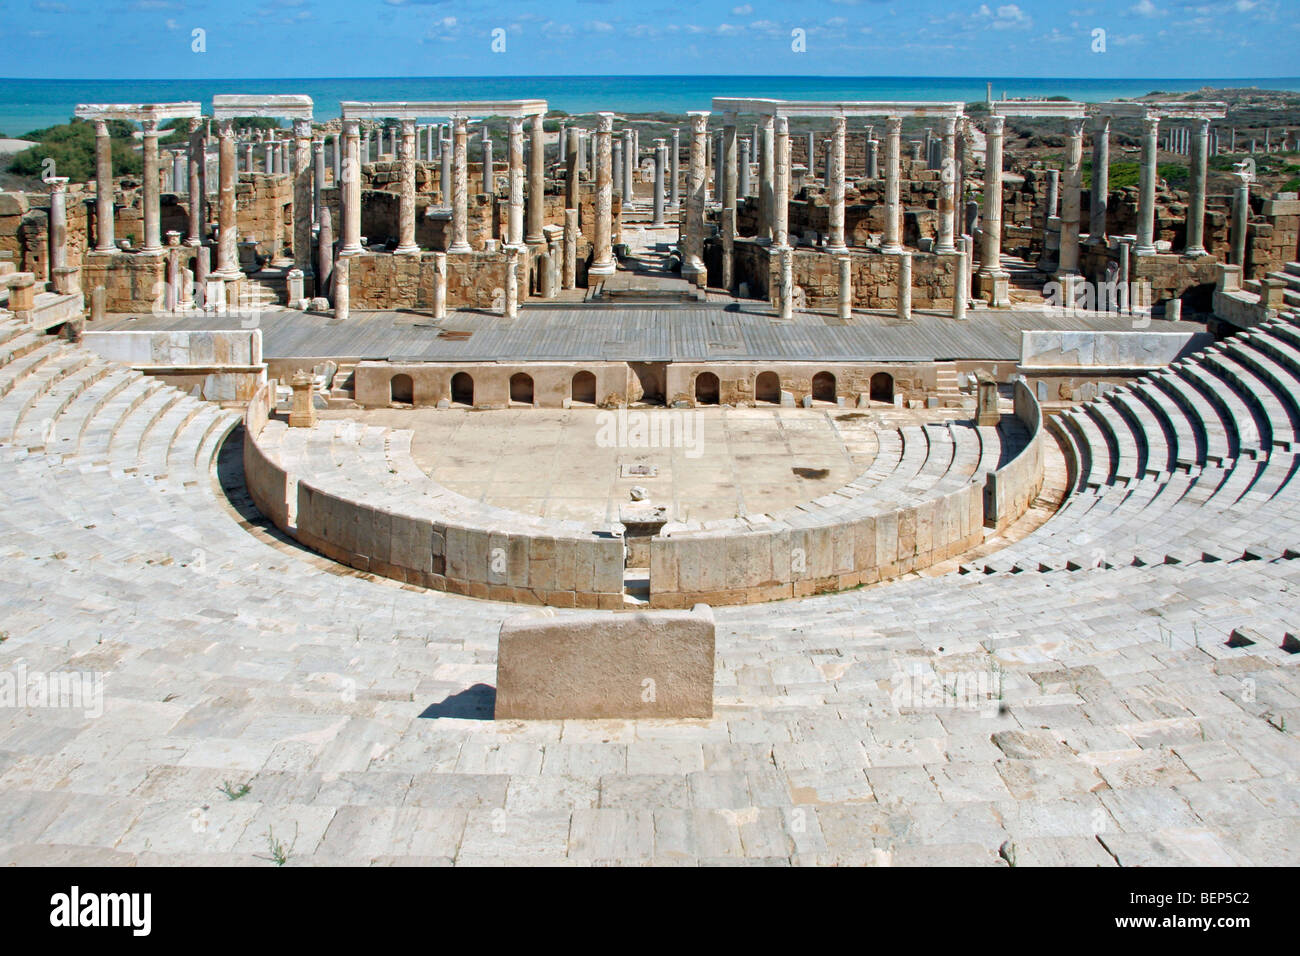 Ruins of Roman theater at Leptis Magna / Lectis Magna / Lepcis Magna in Khoms / Al Khums near Tripoli, Libya, North Africa Stock Photo